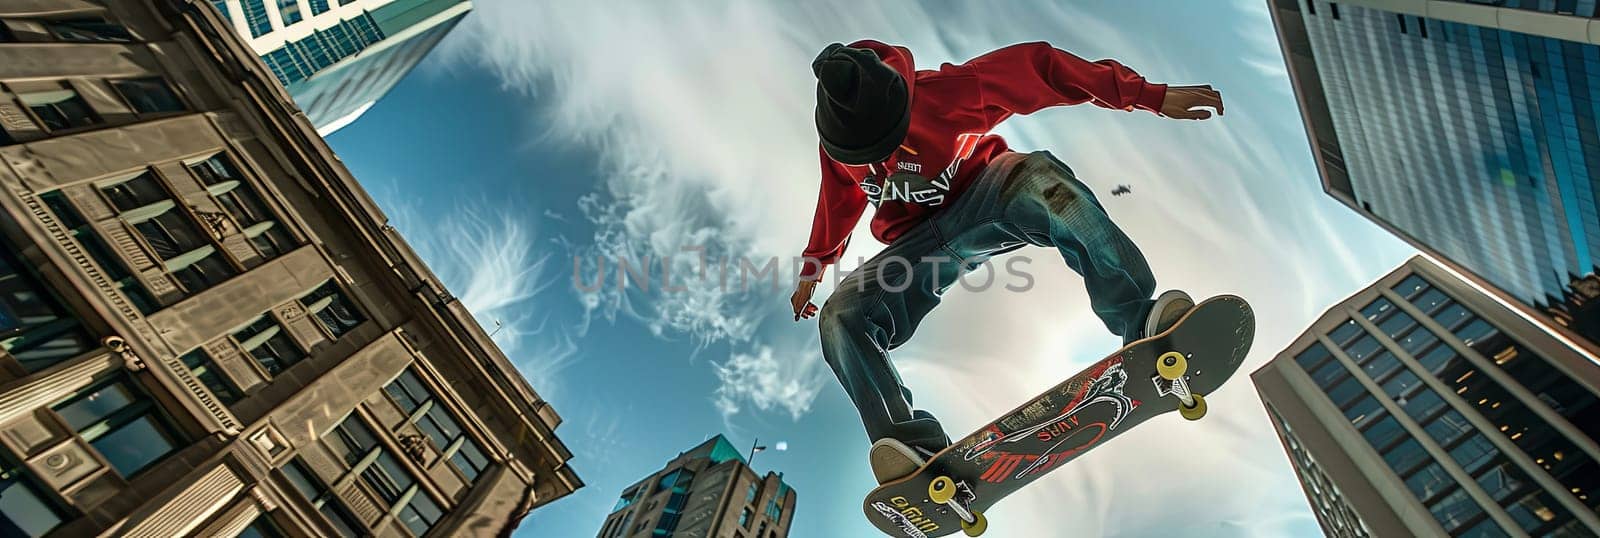 A man is seen riding a skateboard mid-air, leaping from a ramp, showcasing a daring trick in an urban setting.